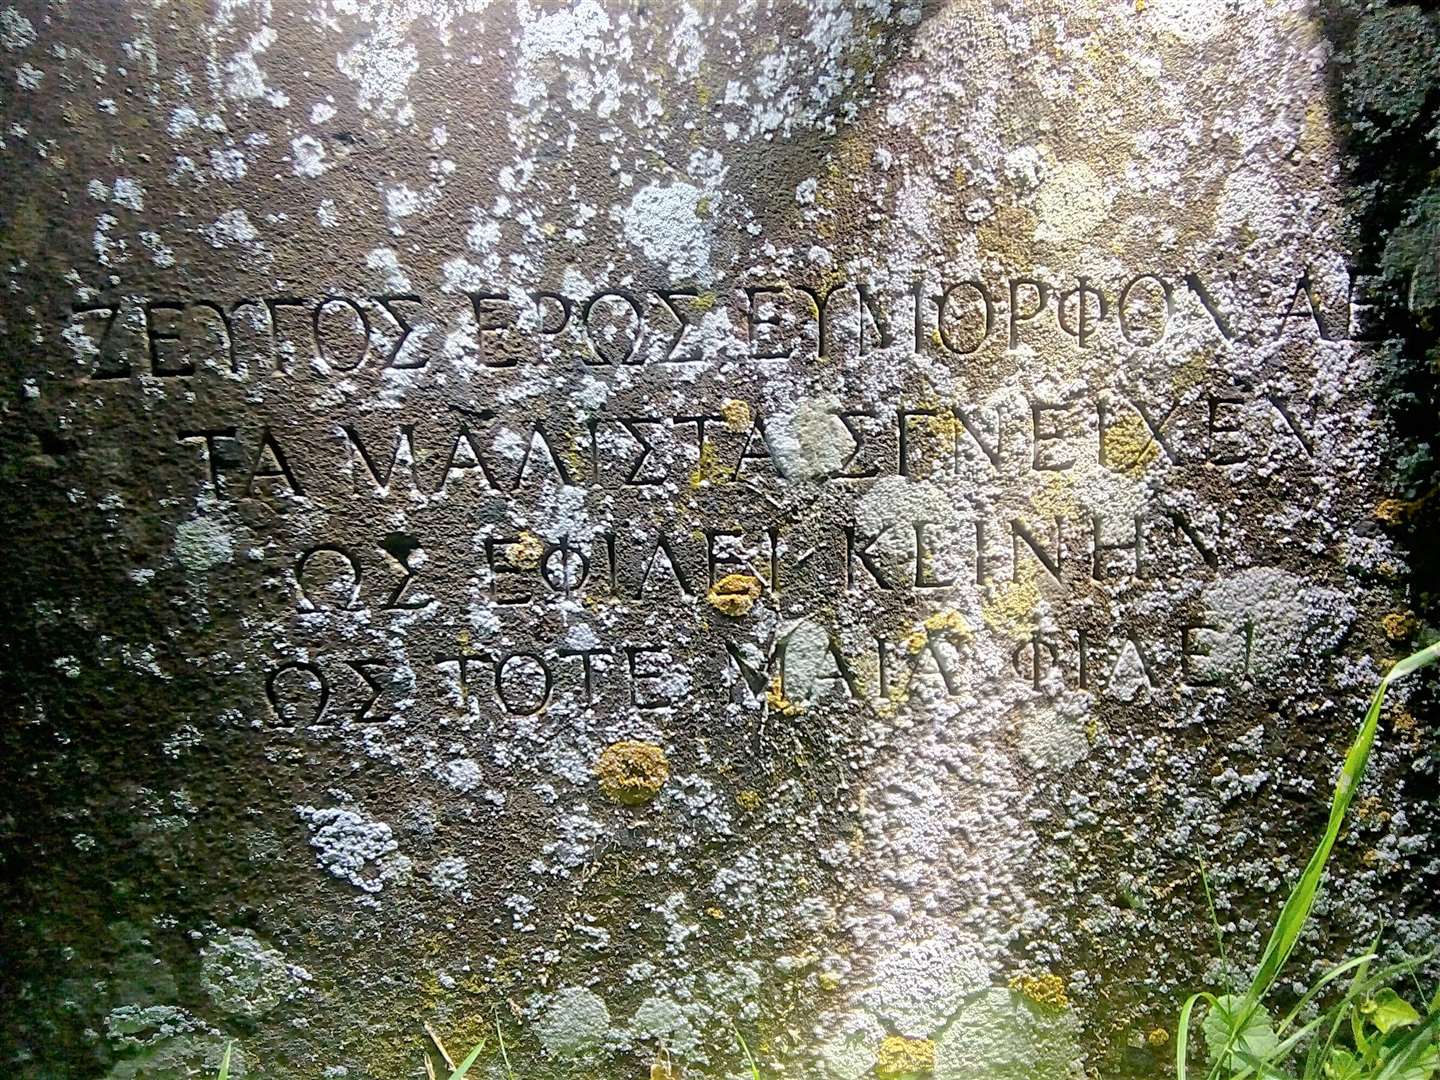 The Greek text which adorns Cecil Headlam's grave